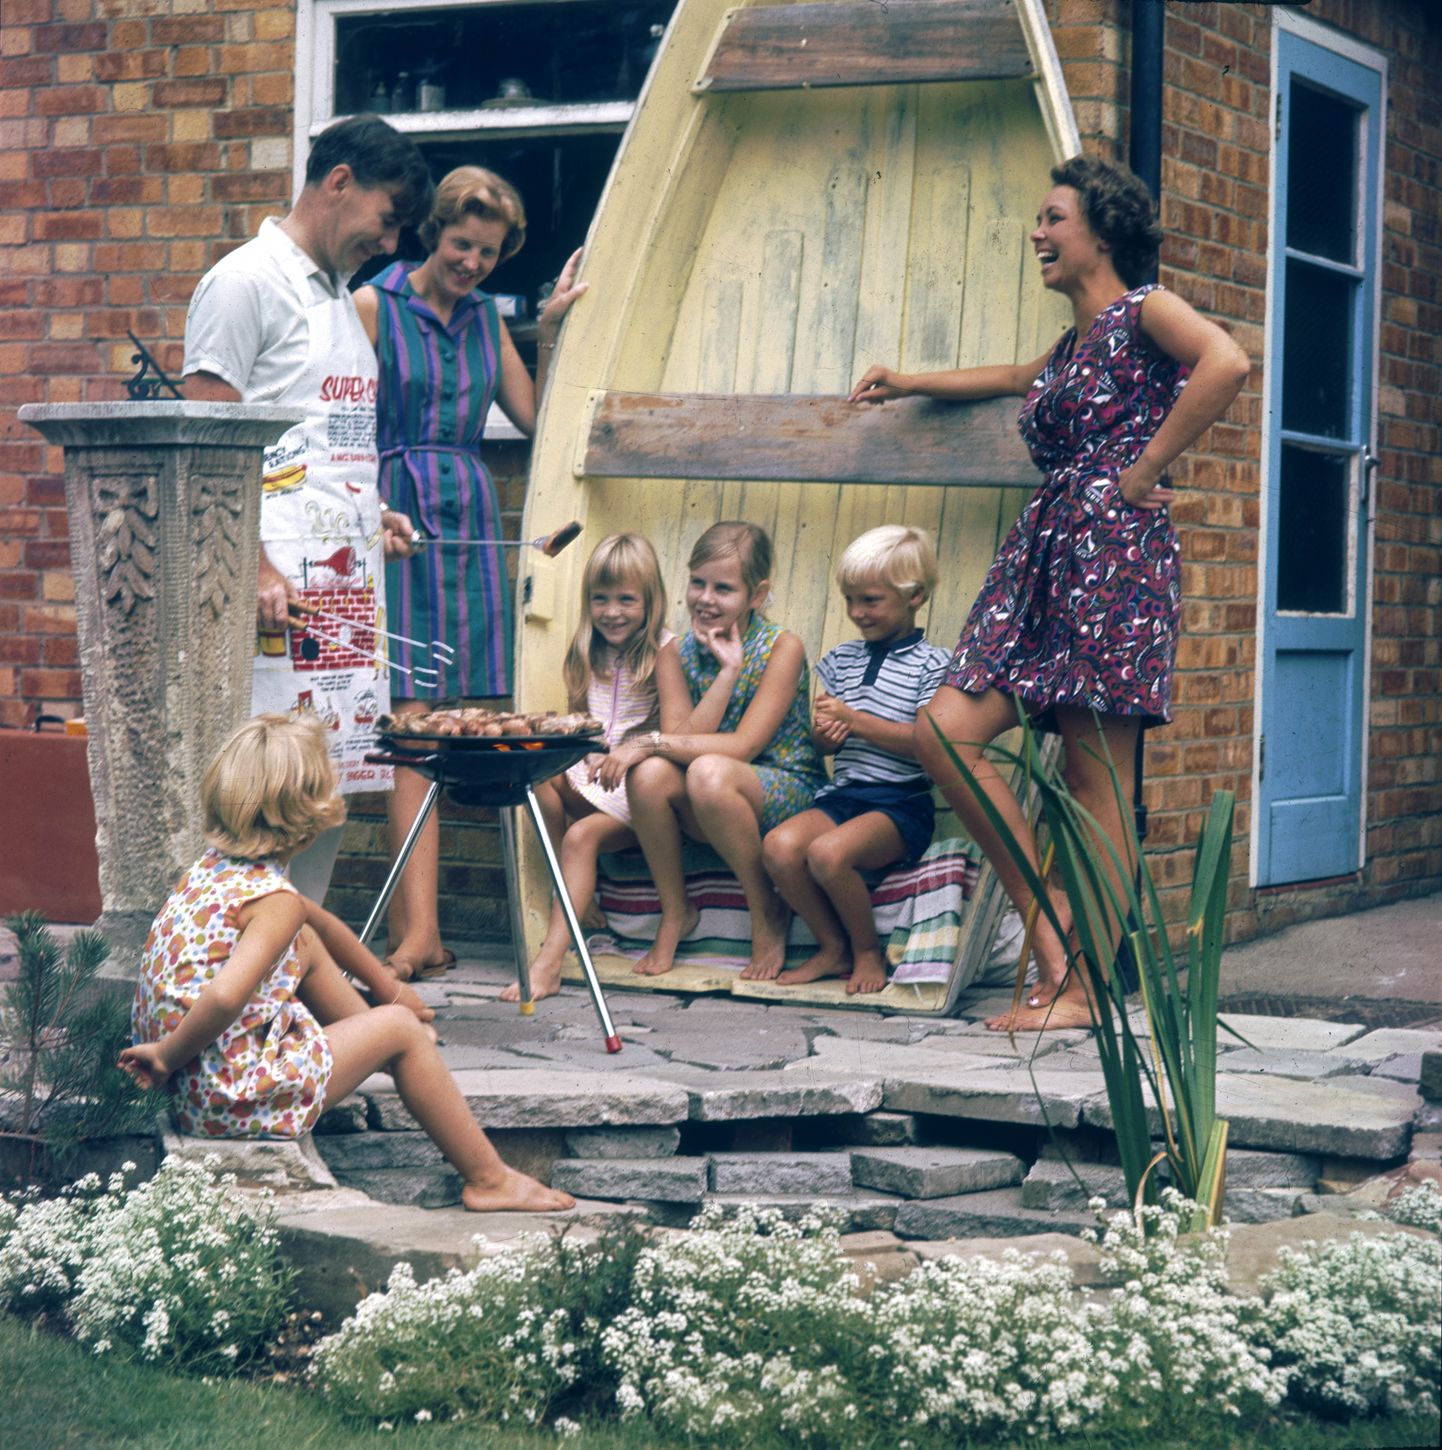 A happy family scene as Dad  barbecues the food on a tripod  barbeque on the patio and  three of the children use an  upturned rowing boat as a  seat!     Date: 1969